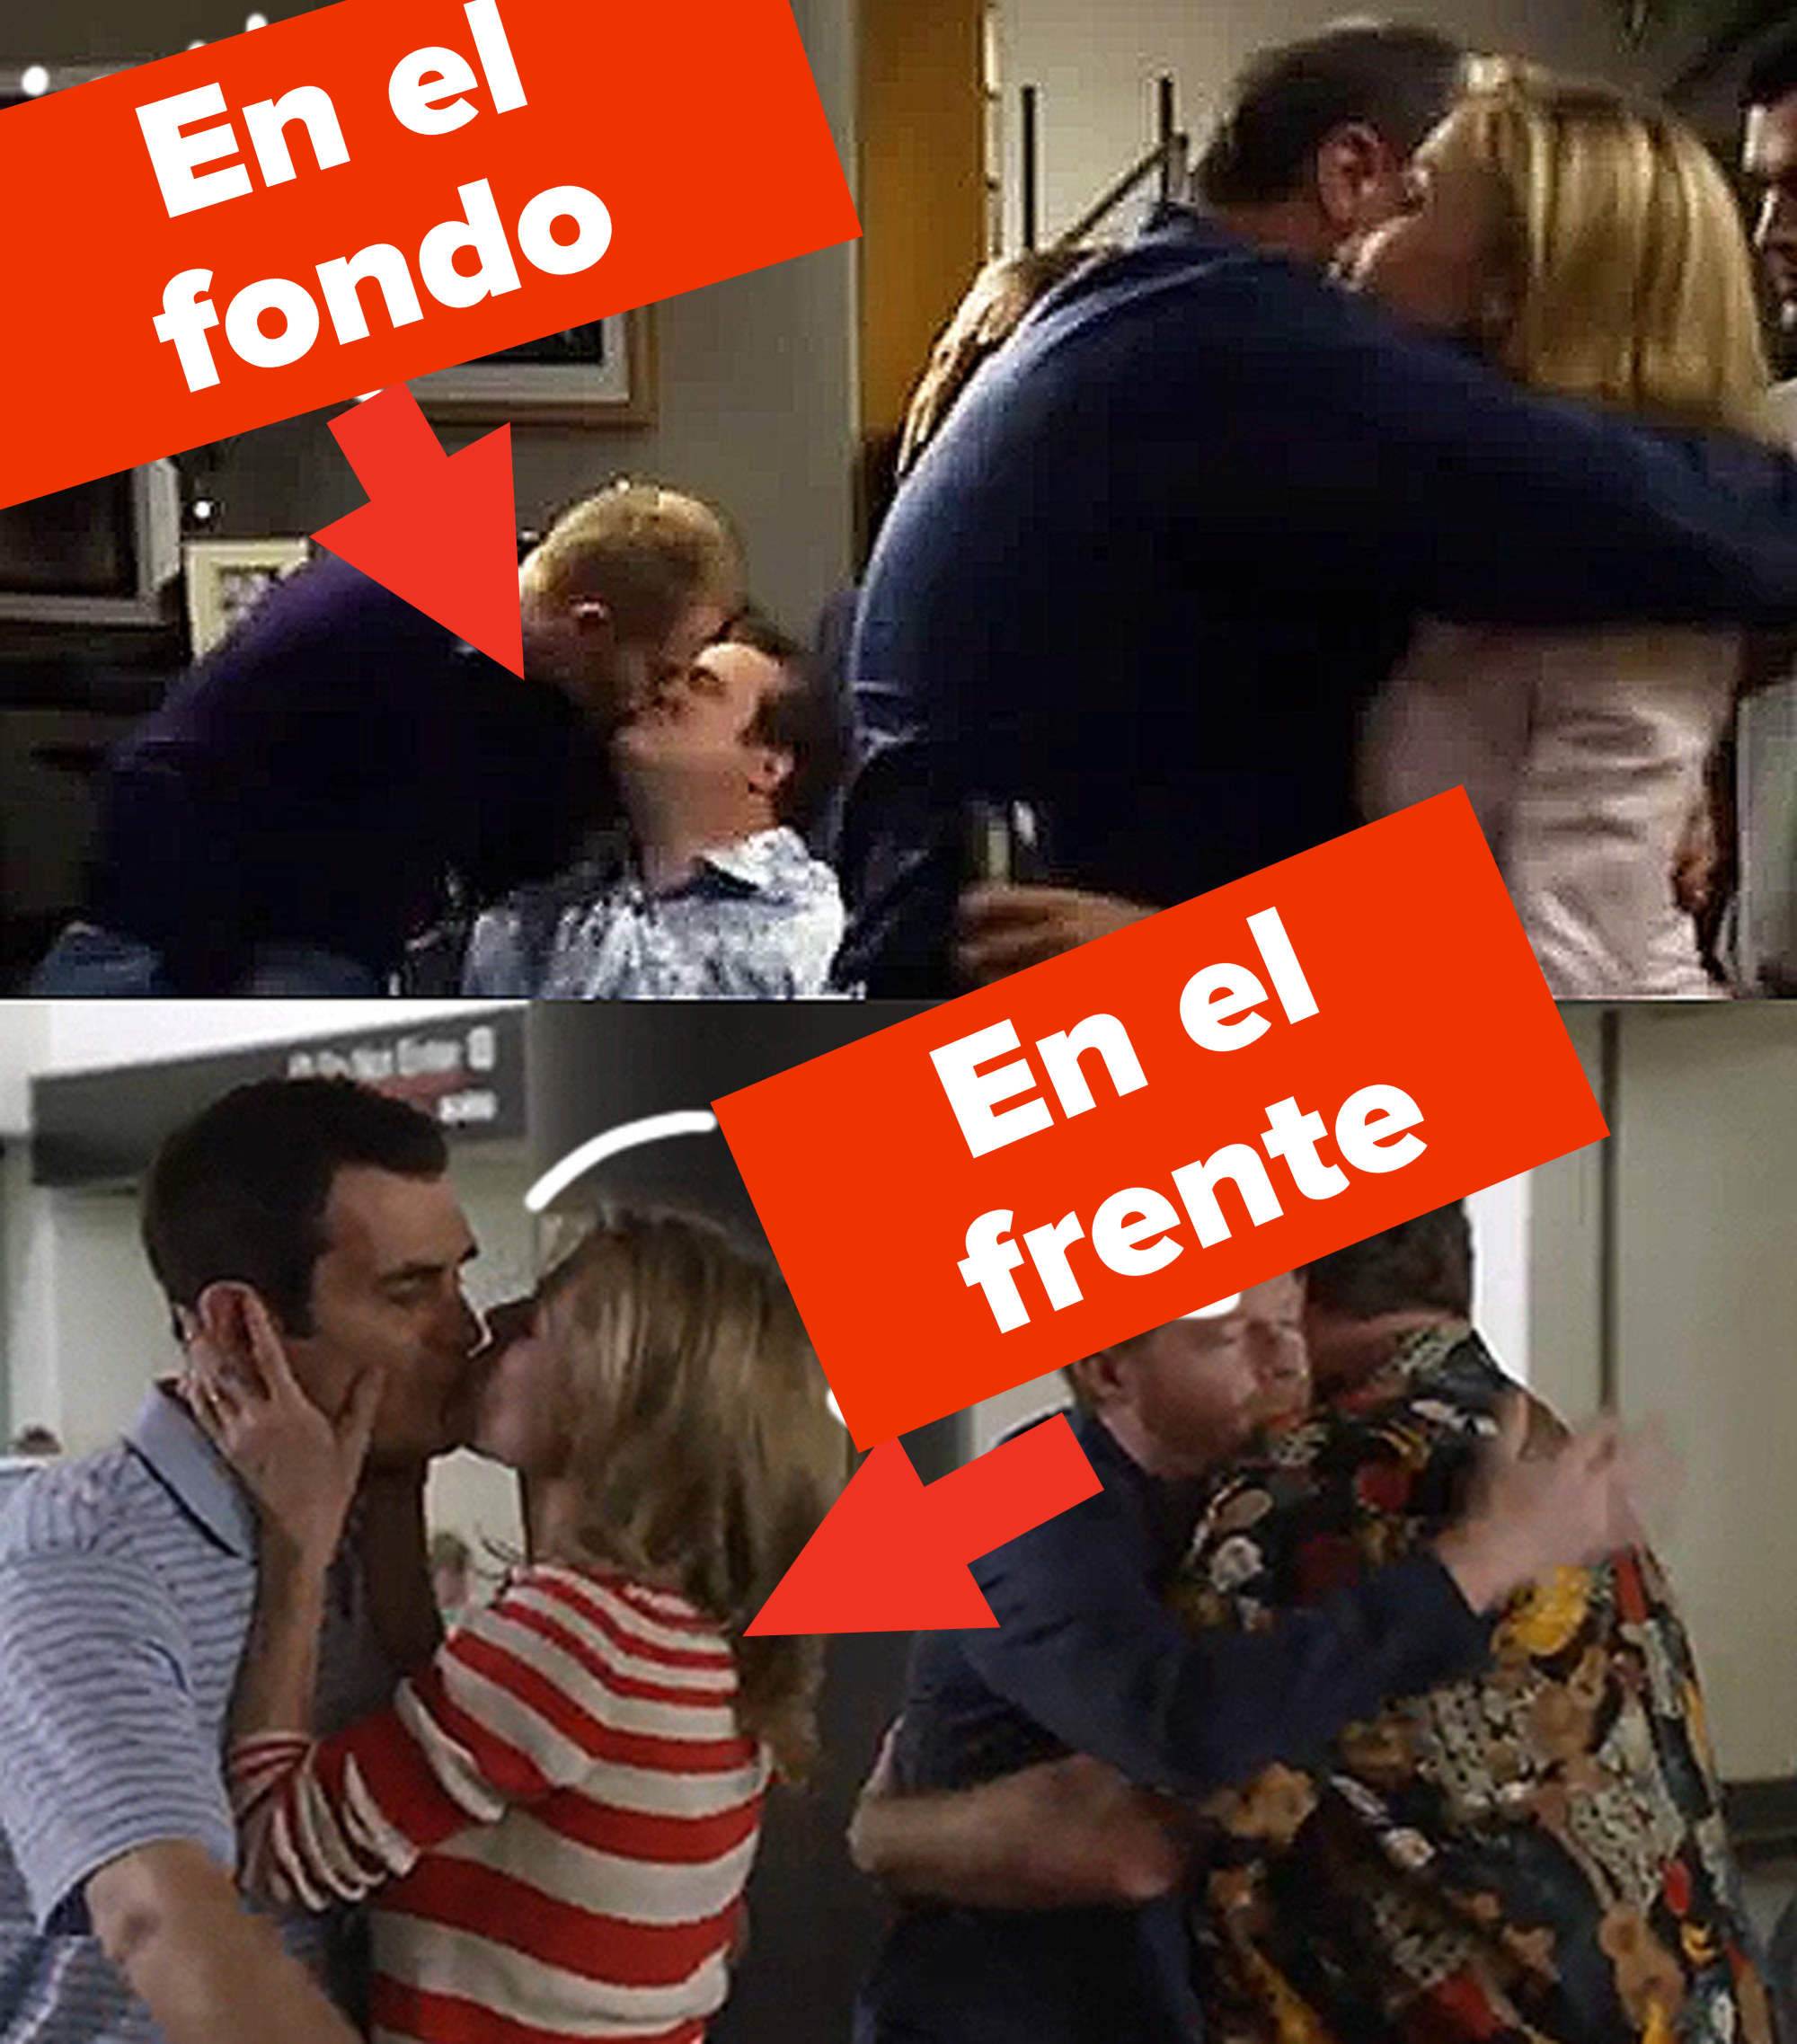 A dual image shows Mitch and Cam, a gay couple from Modern Family, kissing in the background of a shot and the other image shows a straight couple kissing in the foreground. Handwritten text on top points this out